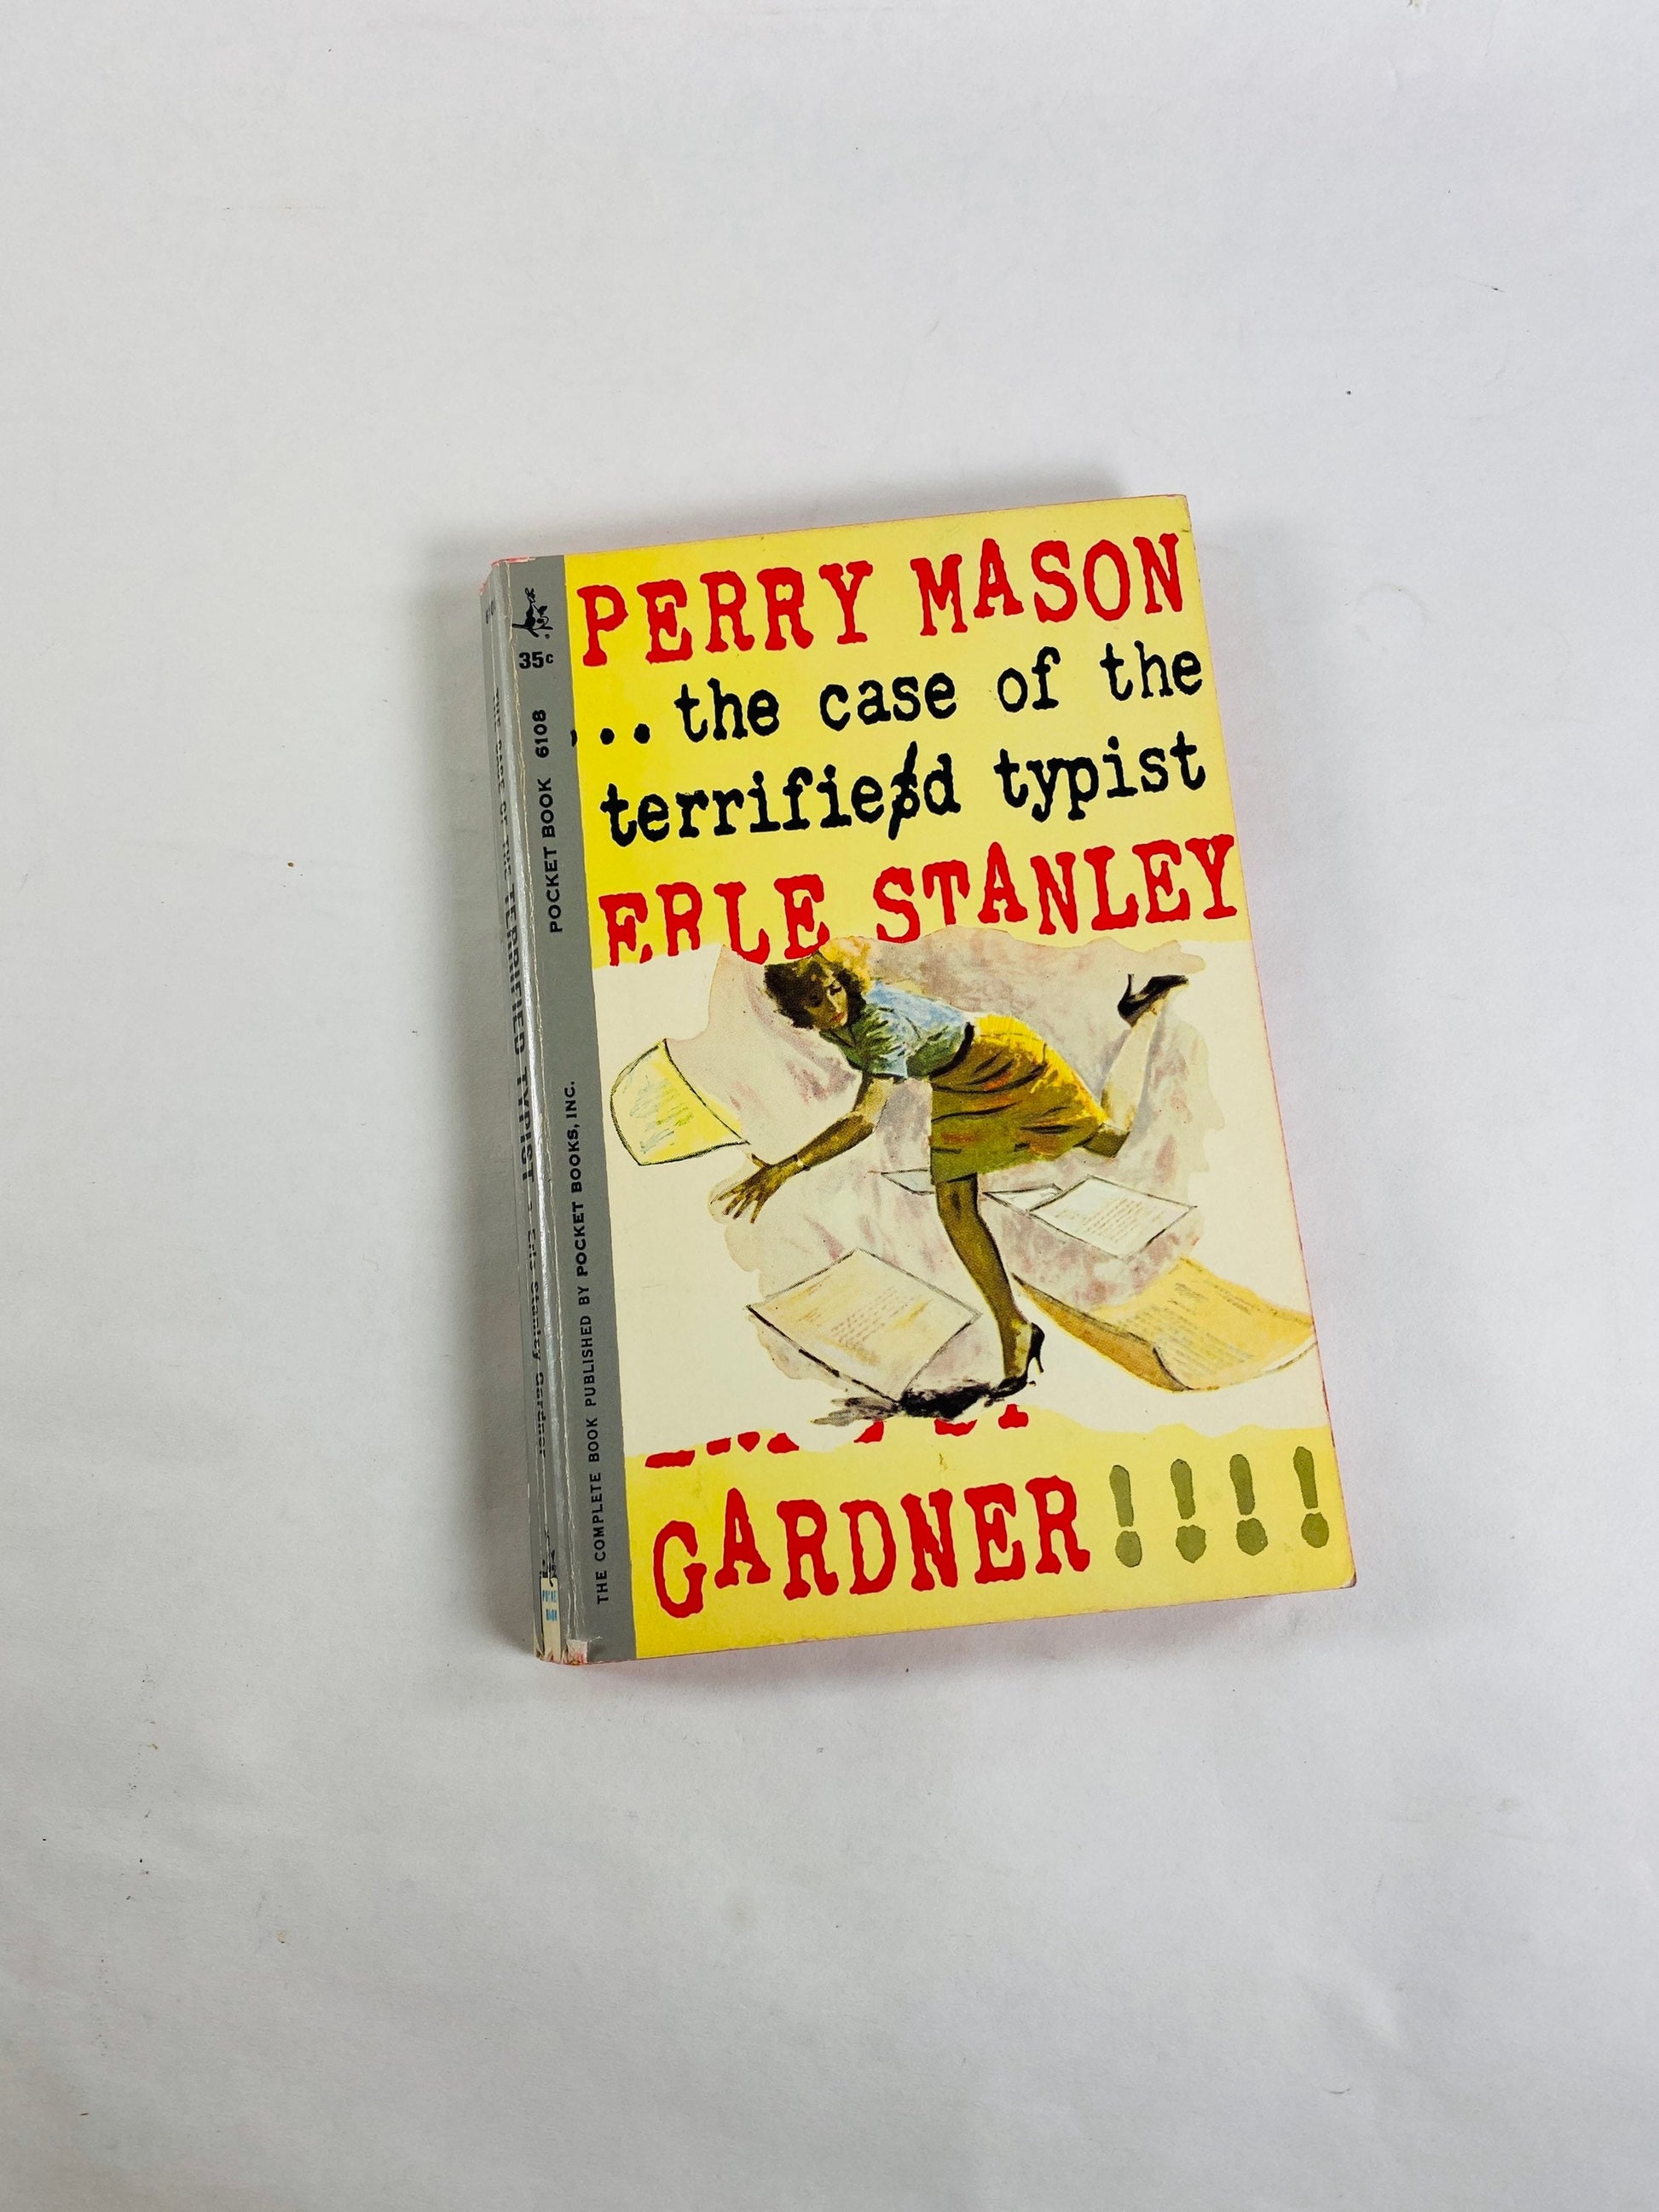 1956 Perry Mason the case of the terrified typist vintage paperback book by Erle Stanley Gardner FIRST PRINTING